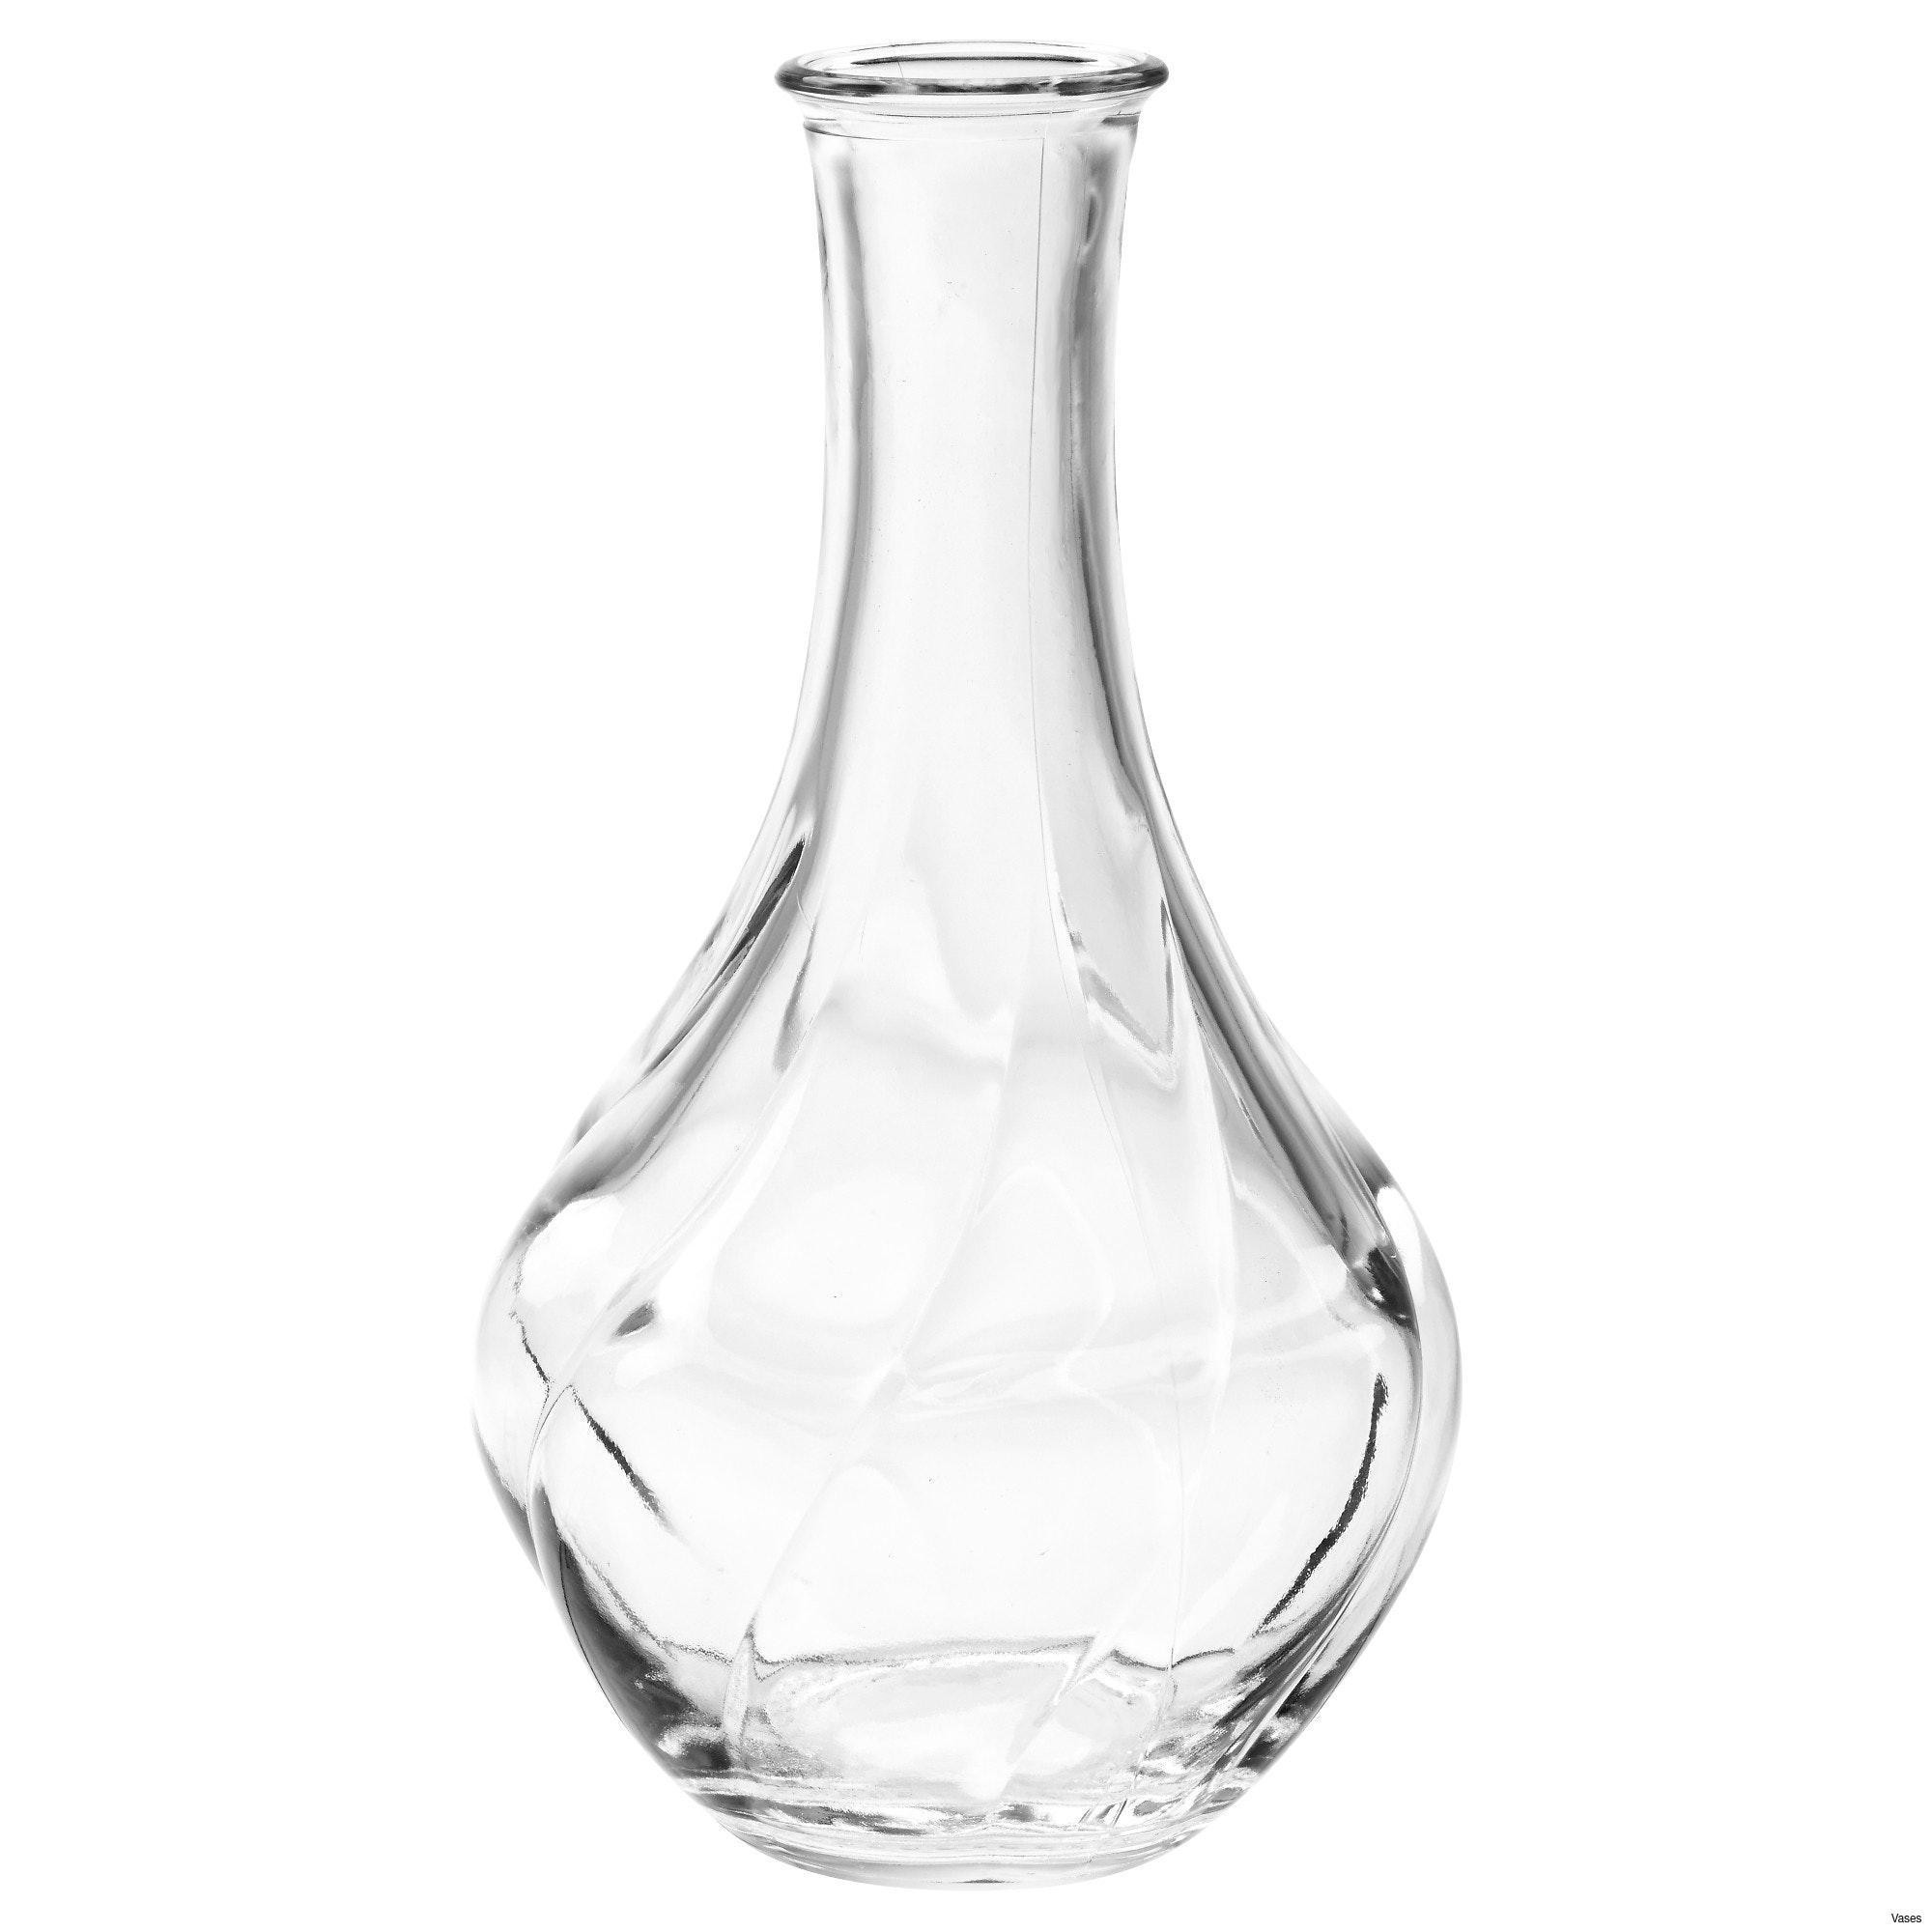 24 Best Big Champagne Glass Vase 2024 free download big champagne glass vase of images of giant glass vase vases artificial plants collection in giant glass vase images living room glass vases fresh clear vase 0d tags amazing and of